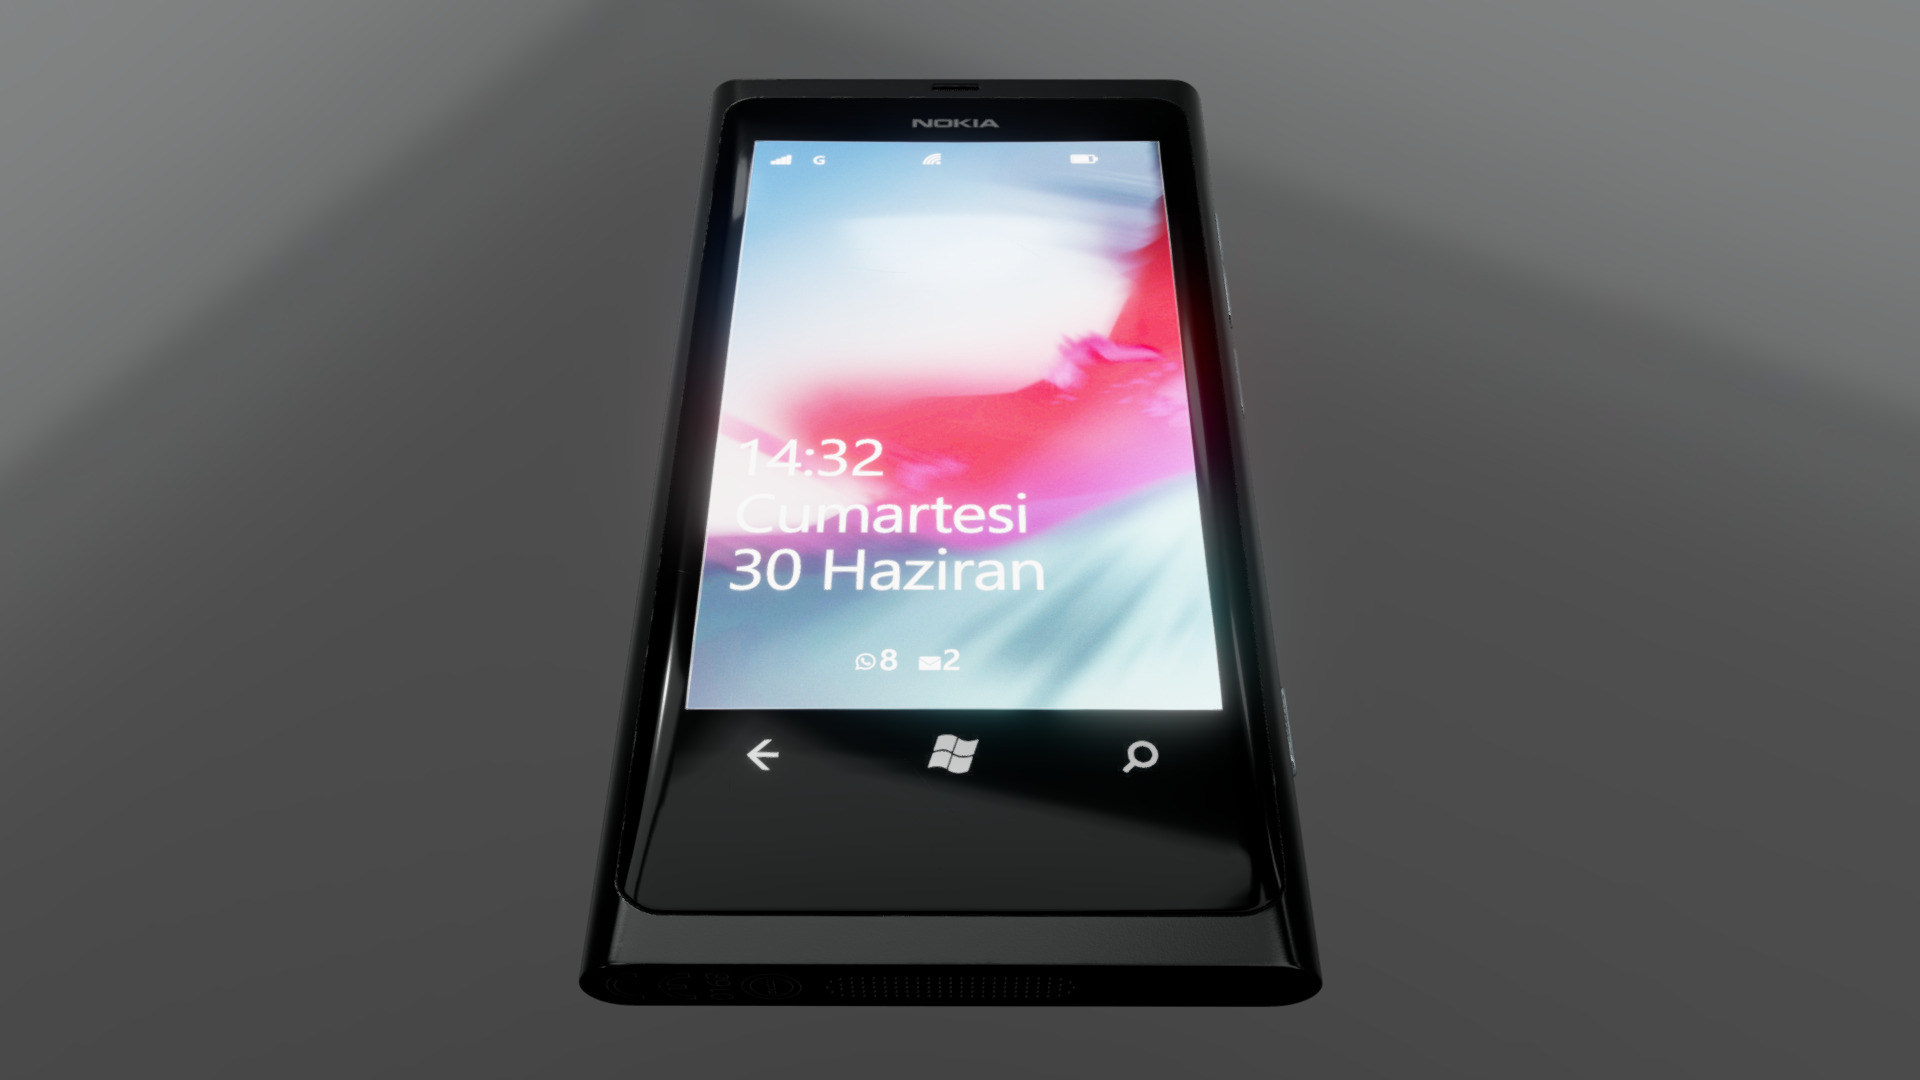 3D model Lumia 800 - This is a 3D model of the Lumia 800. The 3D model is about a black smartphone with a white screen.